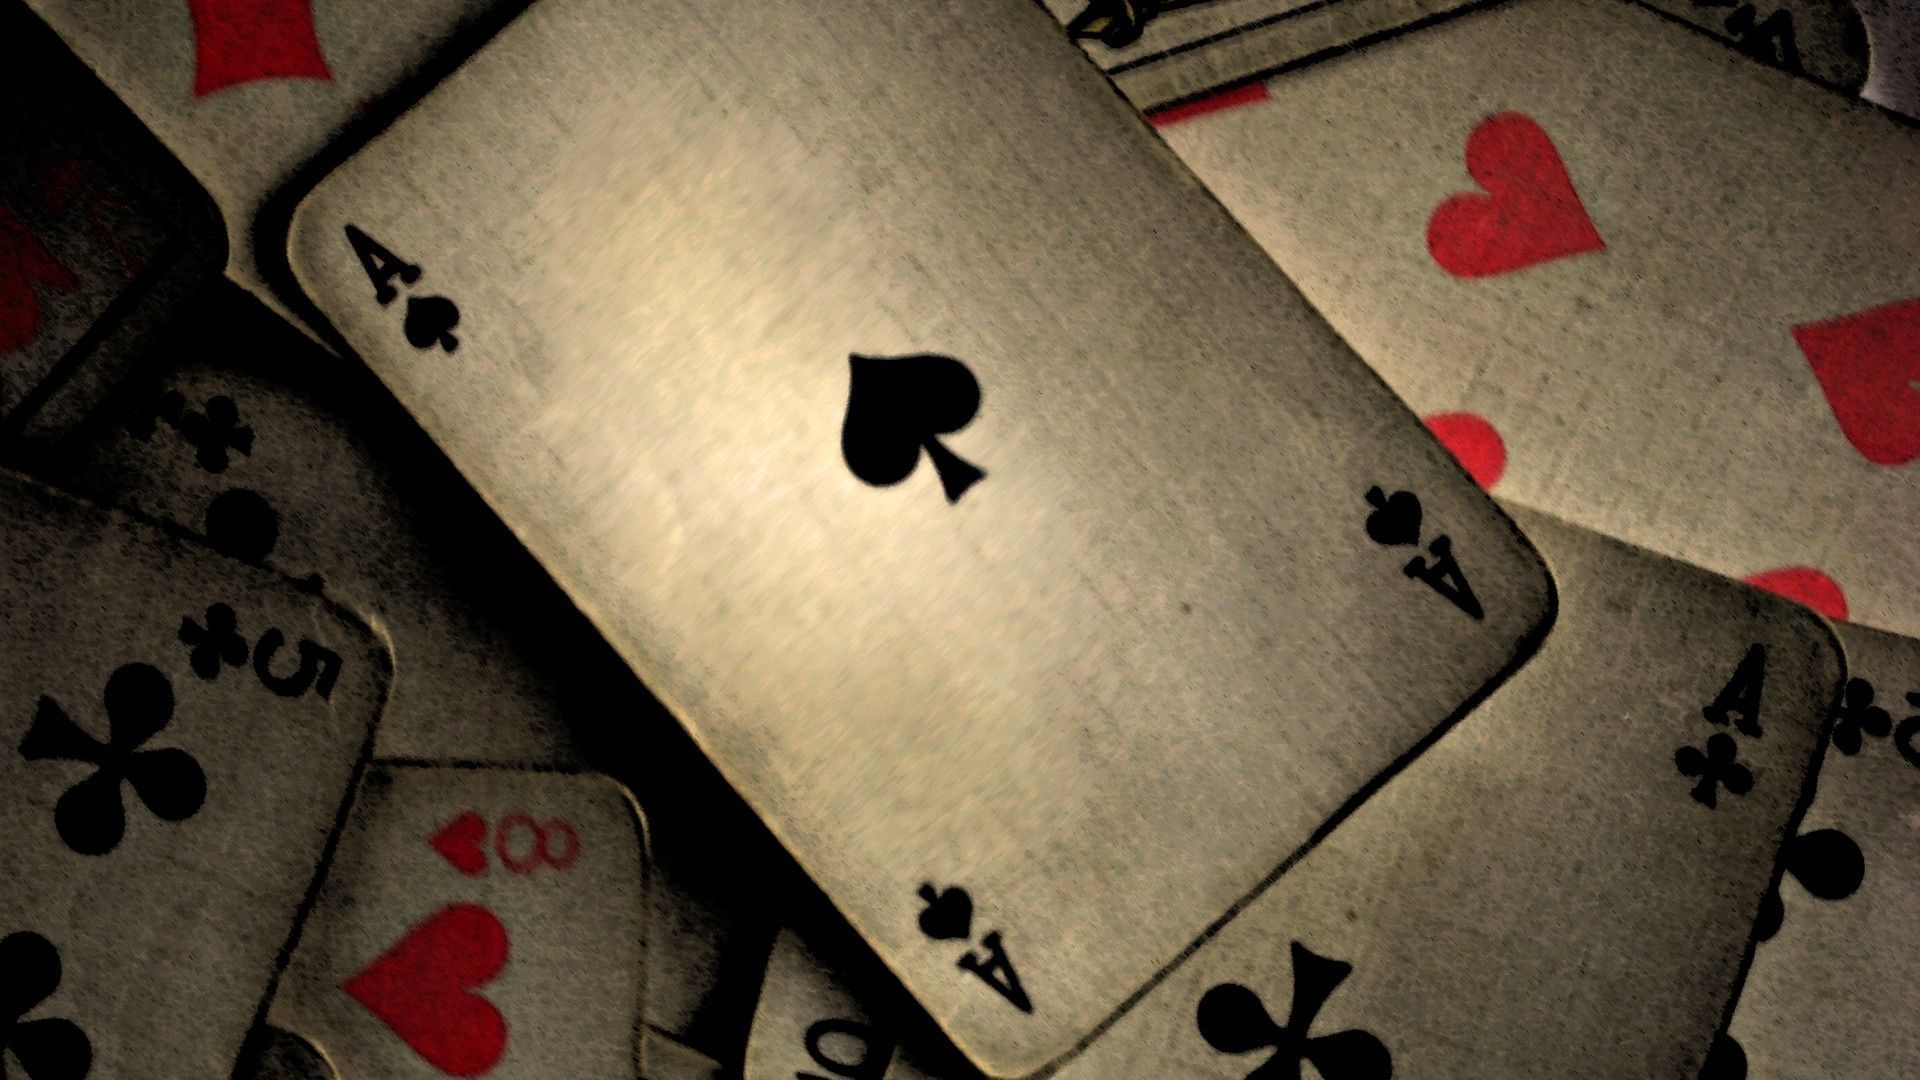 Step into the World of High Stakes Online Casino Gaming